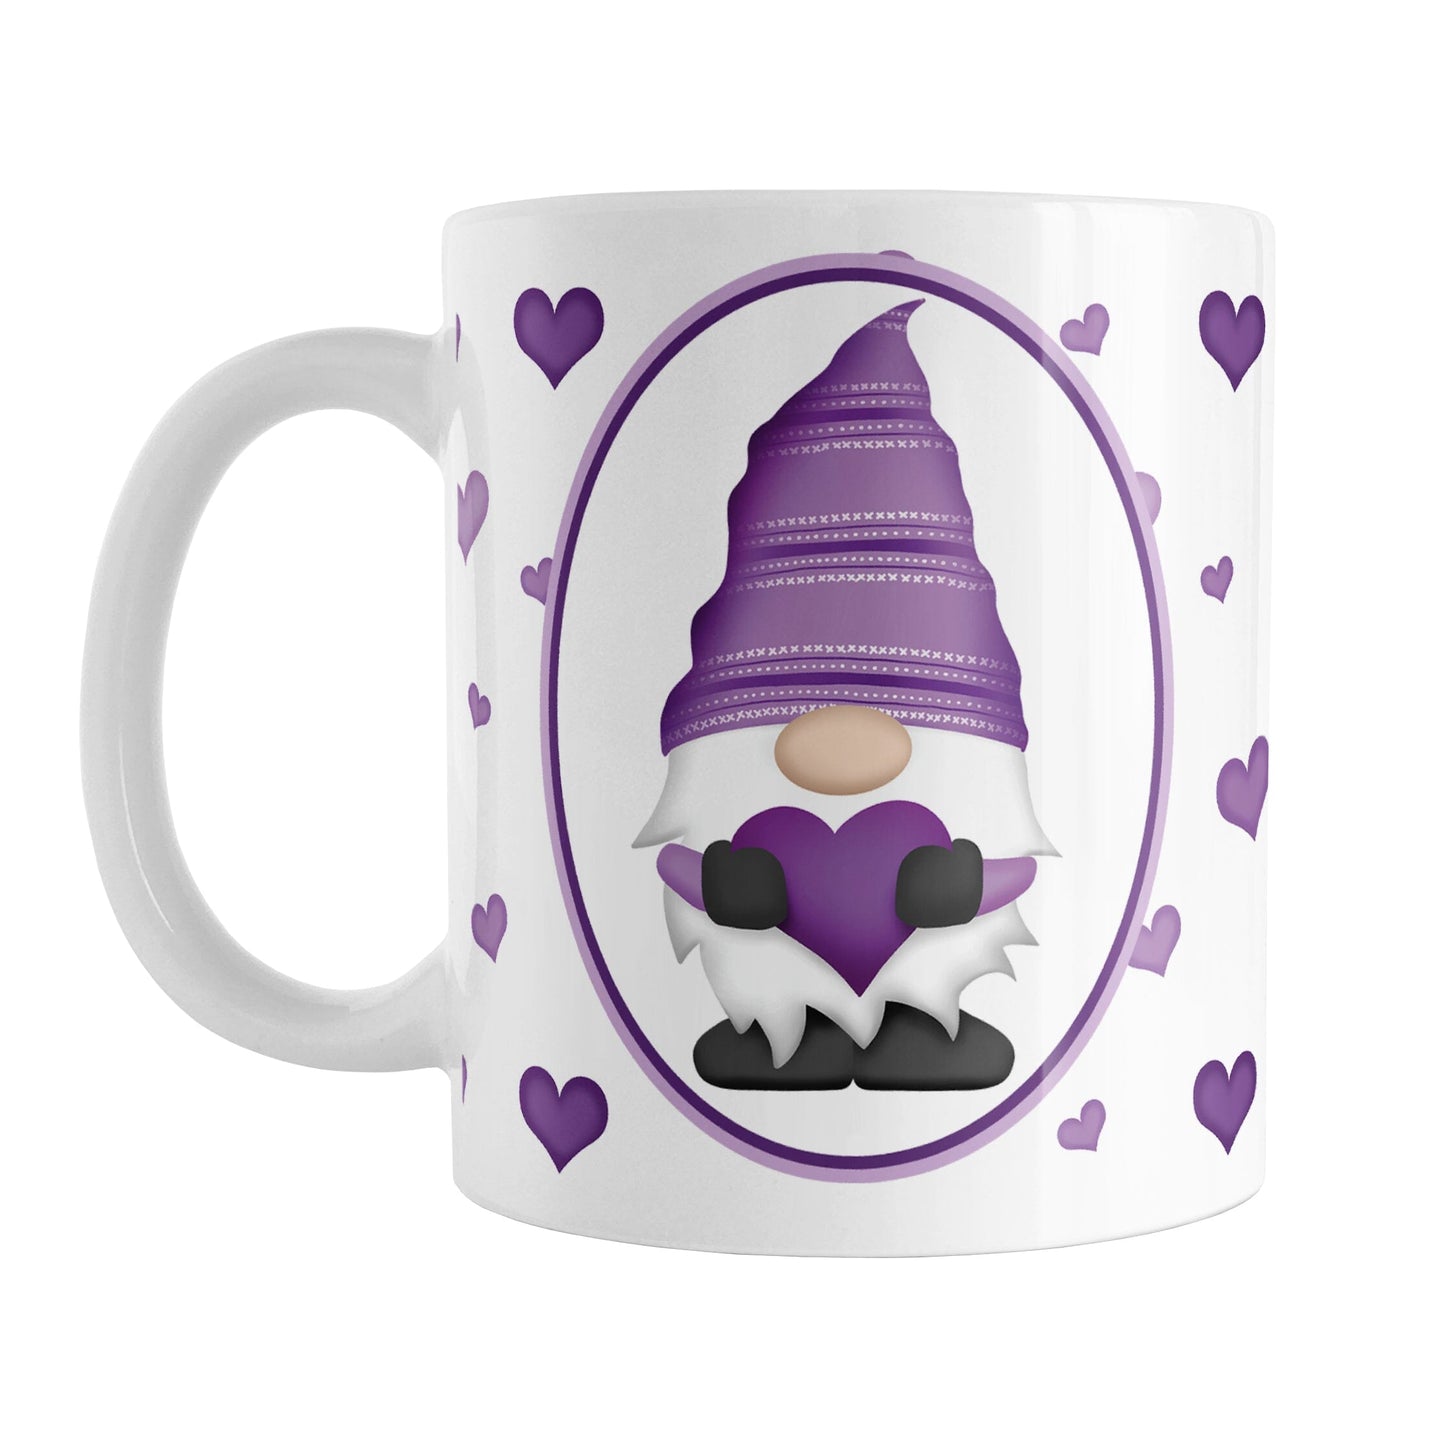 Purple Gnome Dainty Hearts Mug (11oz) at Amy's Coffee Mugs. A ceramic coffee mug designed with an adorable purple gnome in a white oval on both sides of the mug over a pattern of cute dainty hearts in different shades of purple that wrap around the mug to the handle.